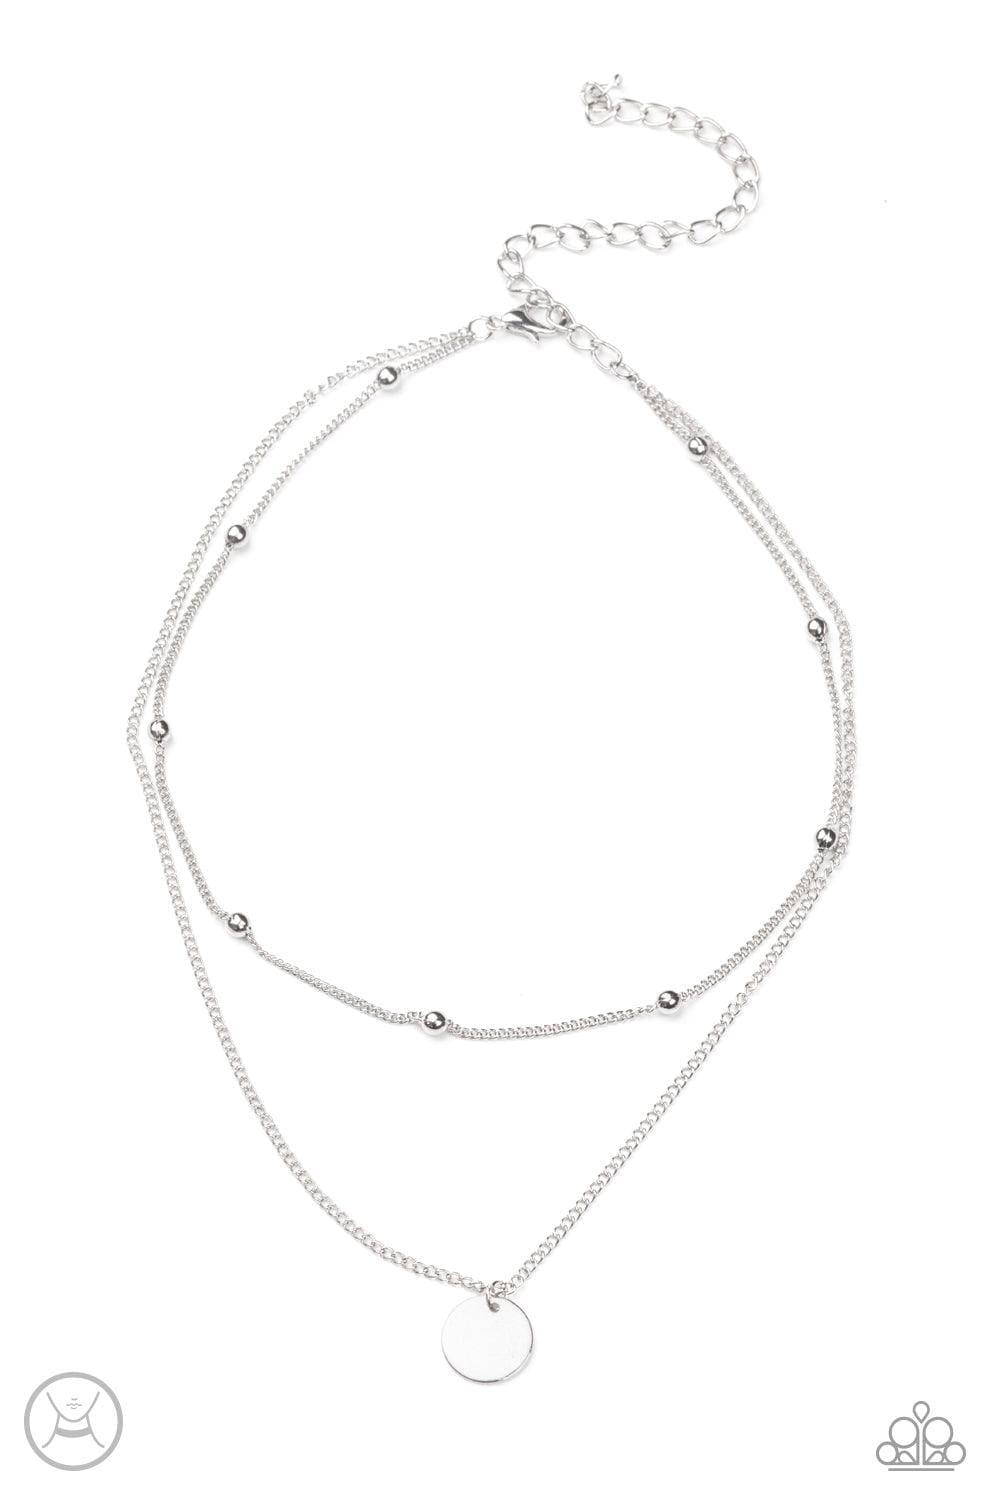 Paparazzi Accessories - Modestly Minimalist - Silver Choker Necklace - Bling by JessieK